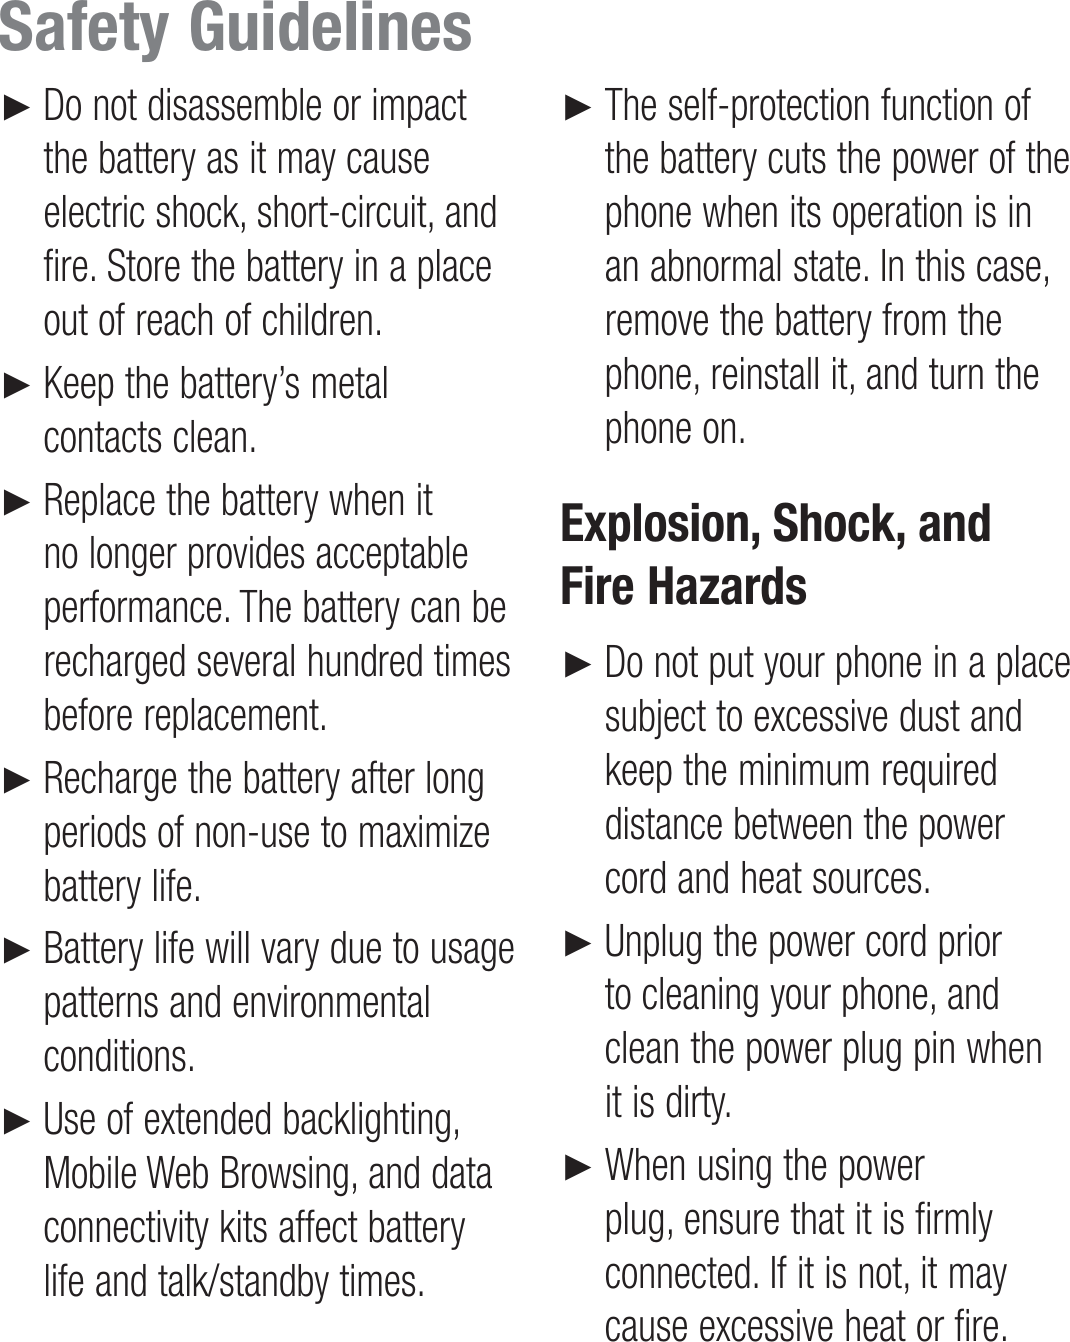 Do not disassemble or impact the battery as it may cause electric shock, short-circuit, and fire. Store the battery in a place out of reach of children.Keep the battery’s metal contacts clean.Replace the battery when it no longer provides acceptable performance. The battery can be recharged several hundred times before replacement.Recharge the battery after long periods of non-use to maximize battery life.Battery life will vary due to usage patterns and environmental conditions.Use of extended backlighting, Mobile Web Browsing, and data connectivity kits affect battery life and talk/standby times.►►►►►►The self-protection function of the battery cuts the power of the phone when its operation is in an abnormal state. In this case, remove the battery from the phone, reinstall it, and turn the phone on.Explosion, Shock, and Fire HazardsDo not put your phone in a place subject to excessive dust and keep the minimum required distance between the power cord and heat sources.Unplug the power cord prior to cleaning your phone, and clean the power plug pin when it is dirty.When using the power plug, ensure that it is firmly connected. If it is not, it may cause excessive heat or fire.►►►►Safety Guidelines